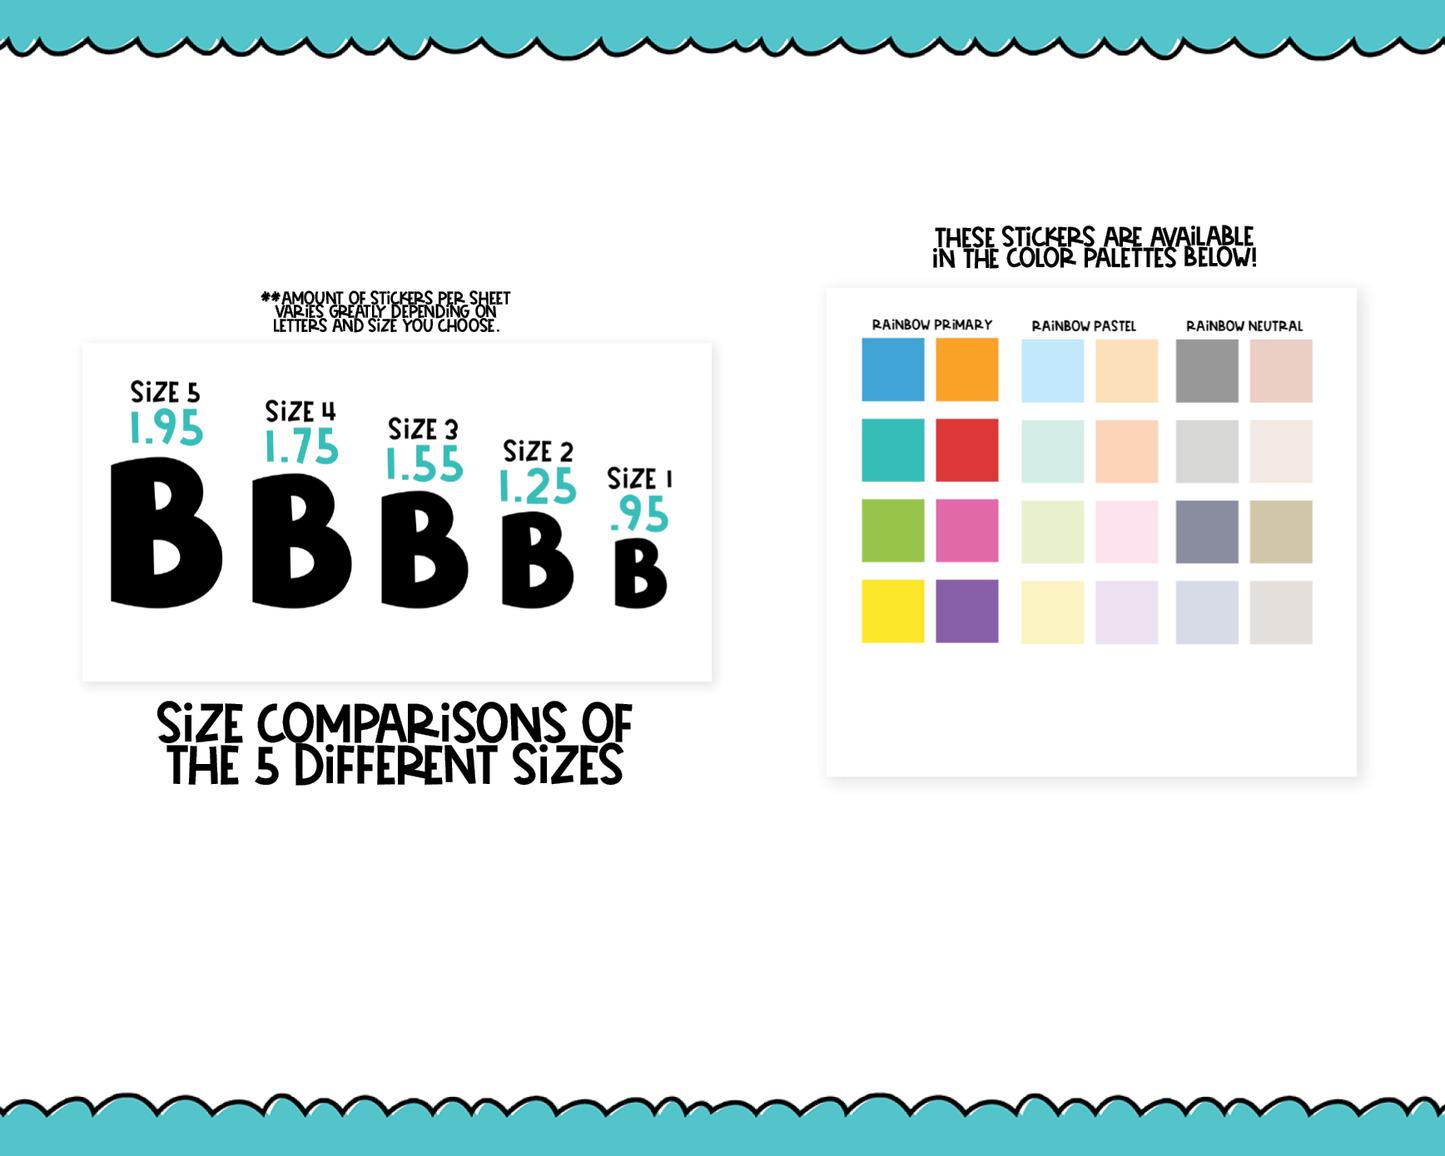 Alpha Bits V1 Number Stickers Grouped By Size Typography Planner Stickers for any Planner or Insert